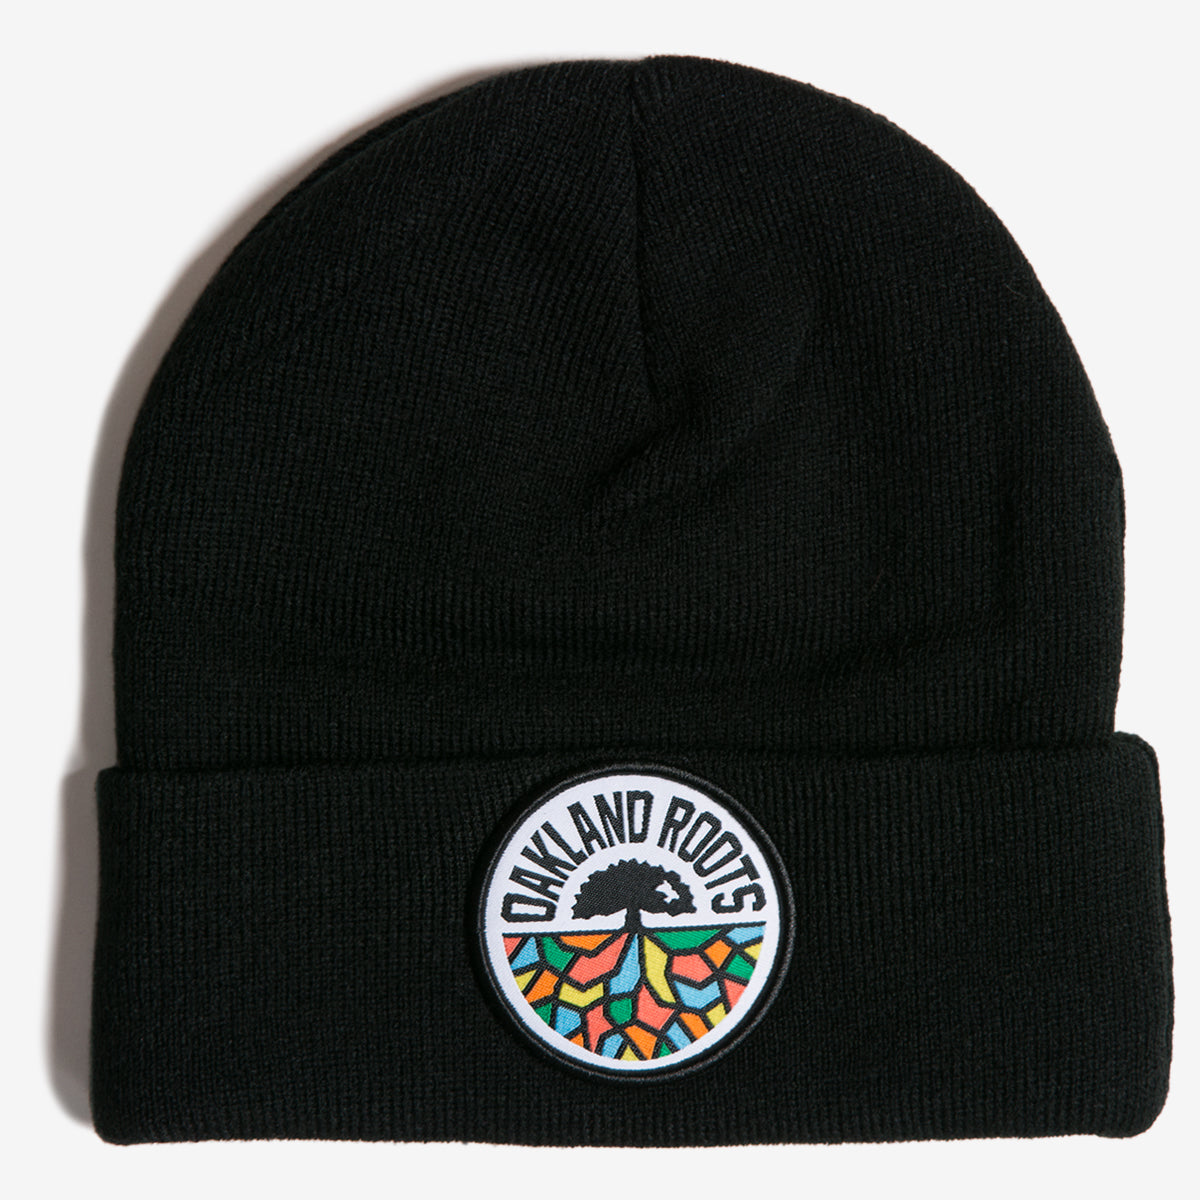 Black acrylic cuffed beanie with a full-color round Oakland Roots SC logo on the front cuff.